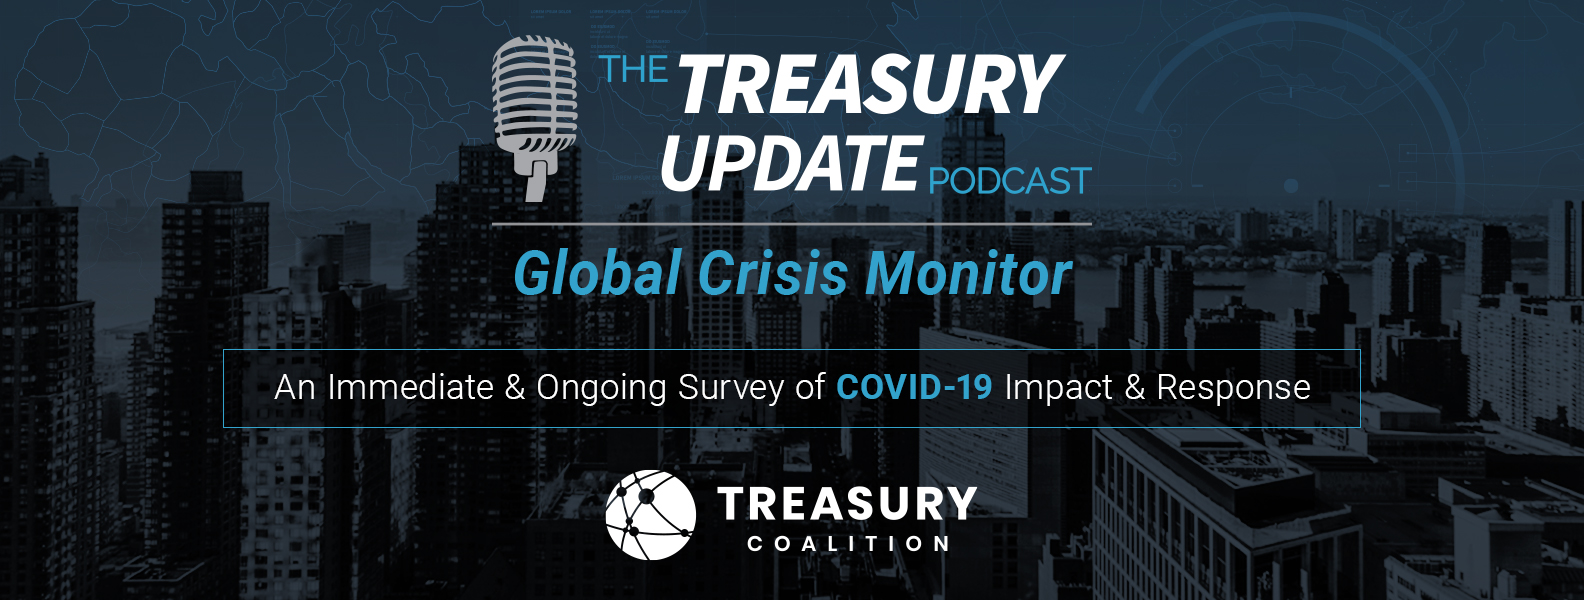 Global Crisis Monitor Podcast Series